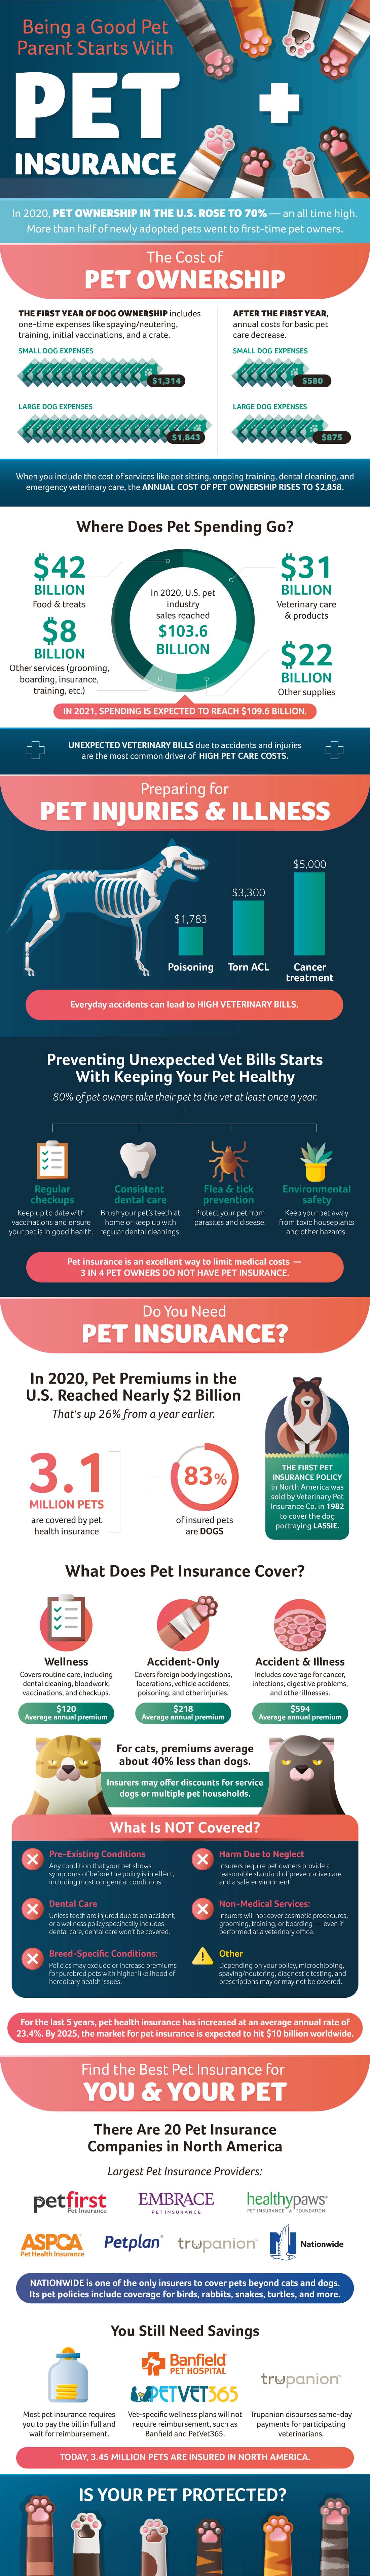 The Benefits of Pet Insurance